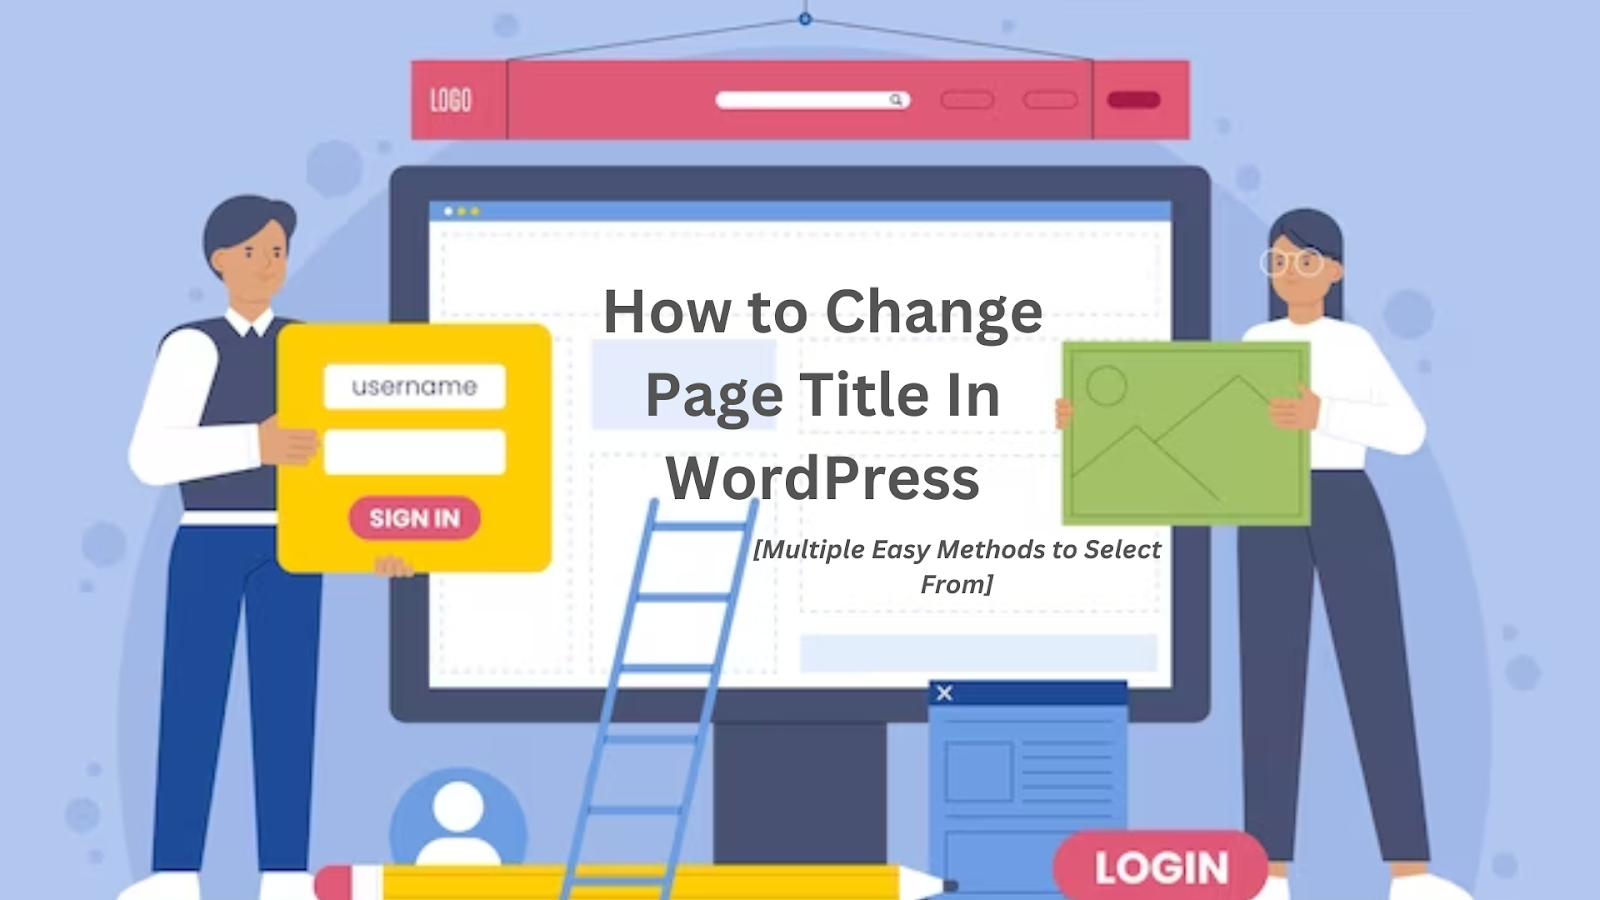 Graphic Illustrating the Question, "How to Change Page Title in WordPress"